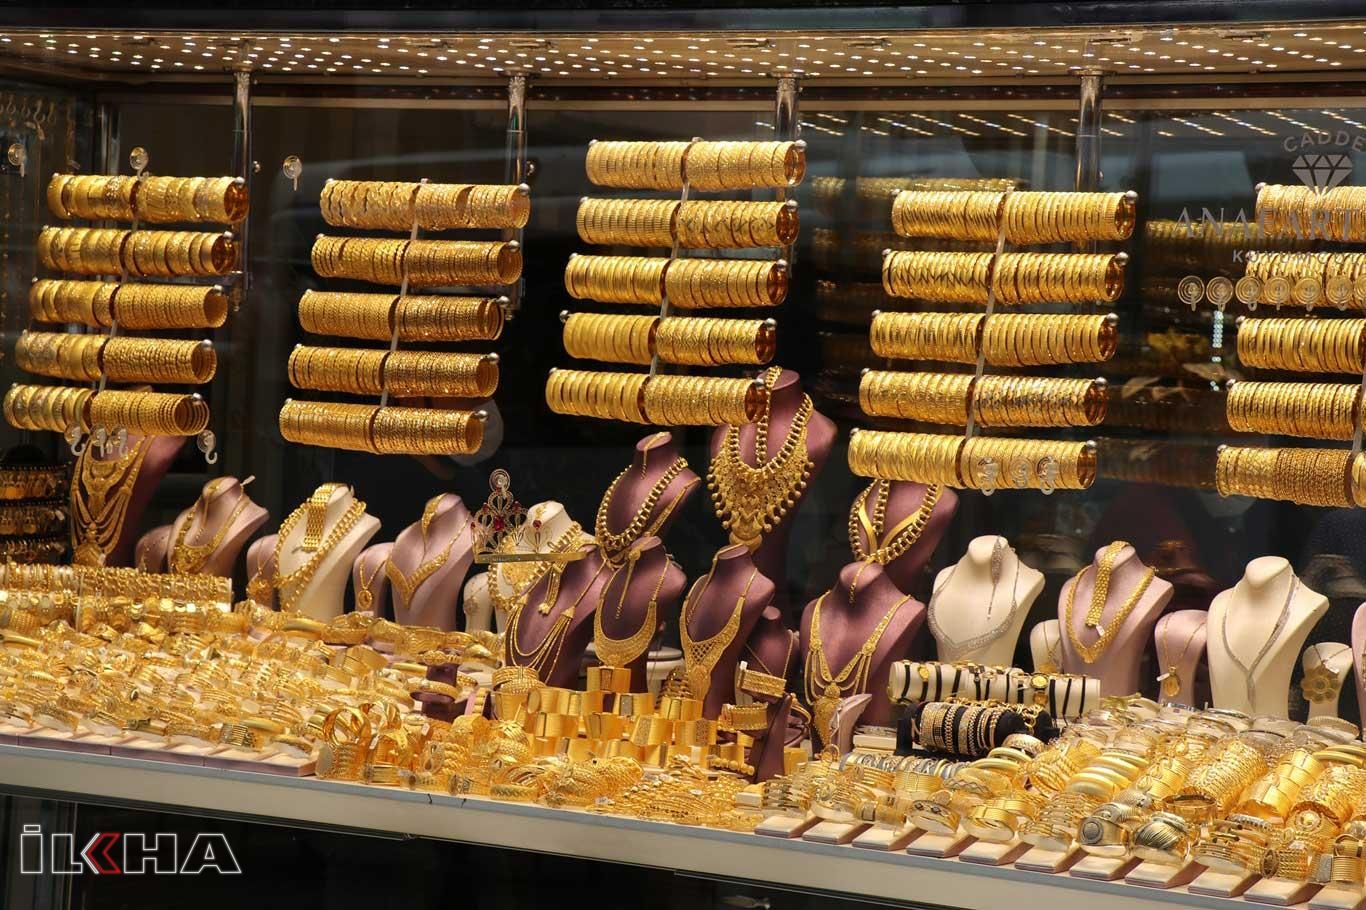 People of Turkey turn deaf ear to Erdoğan’s call to sell gold, foreign currencies 89